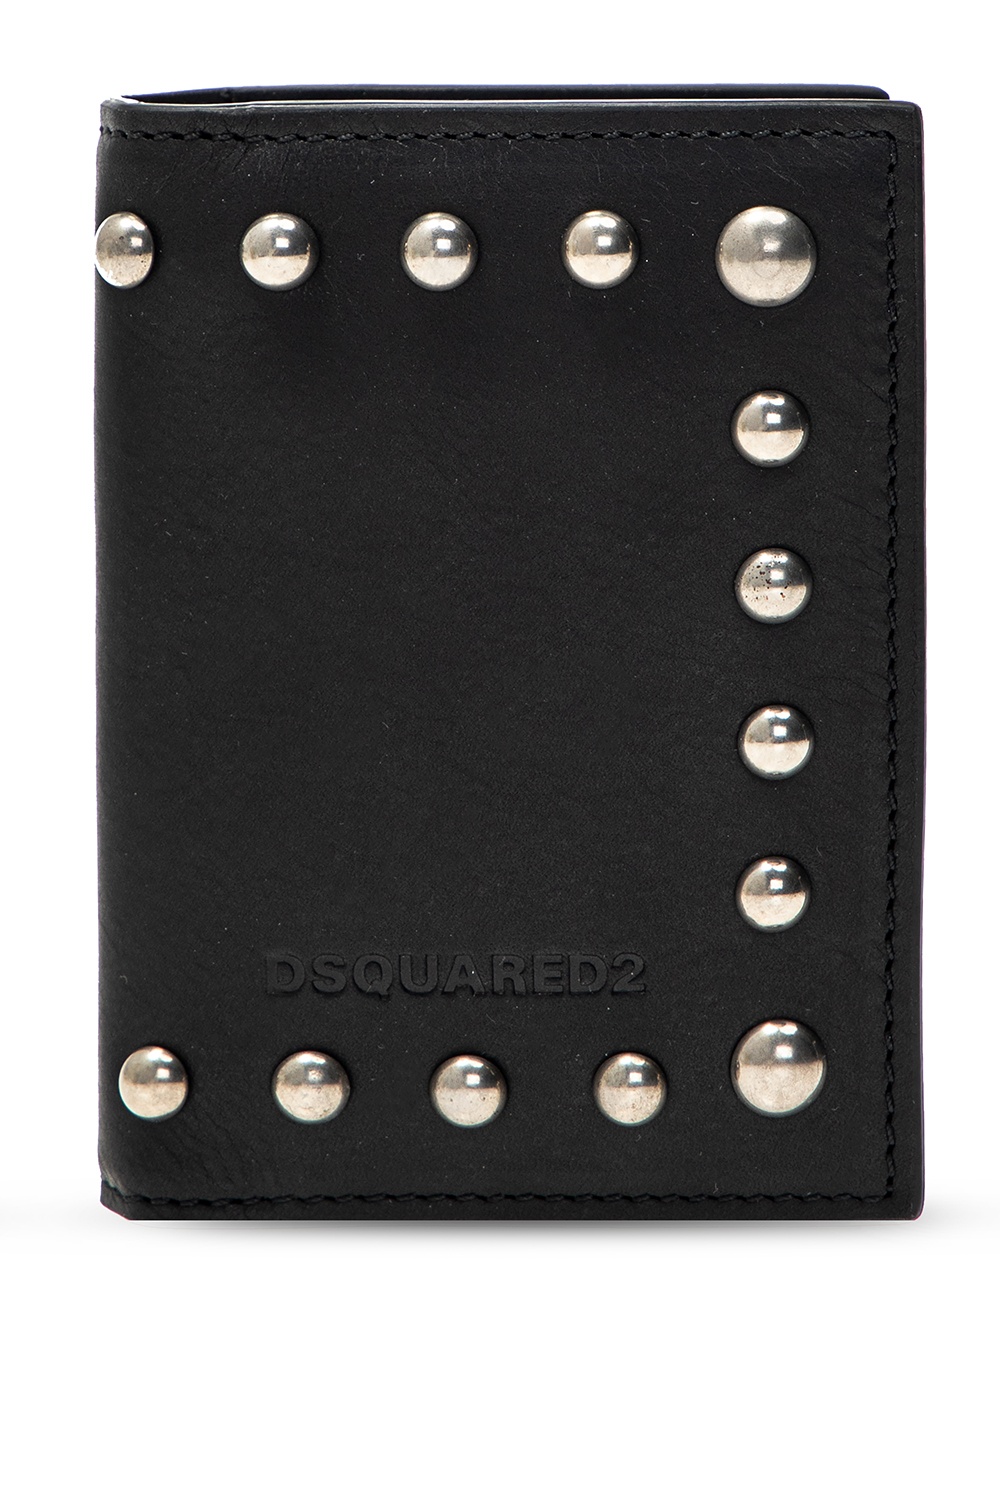 Dsquared2 Card holder with logo | Men's Accessories | Vitkac